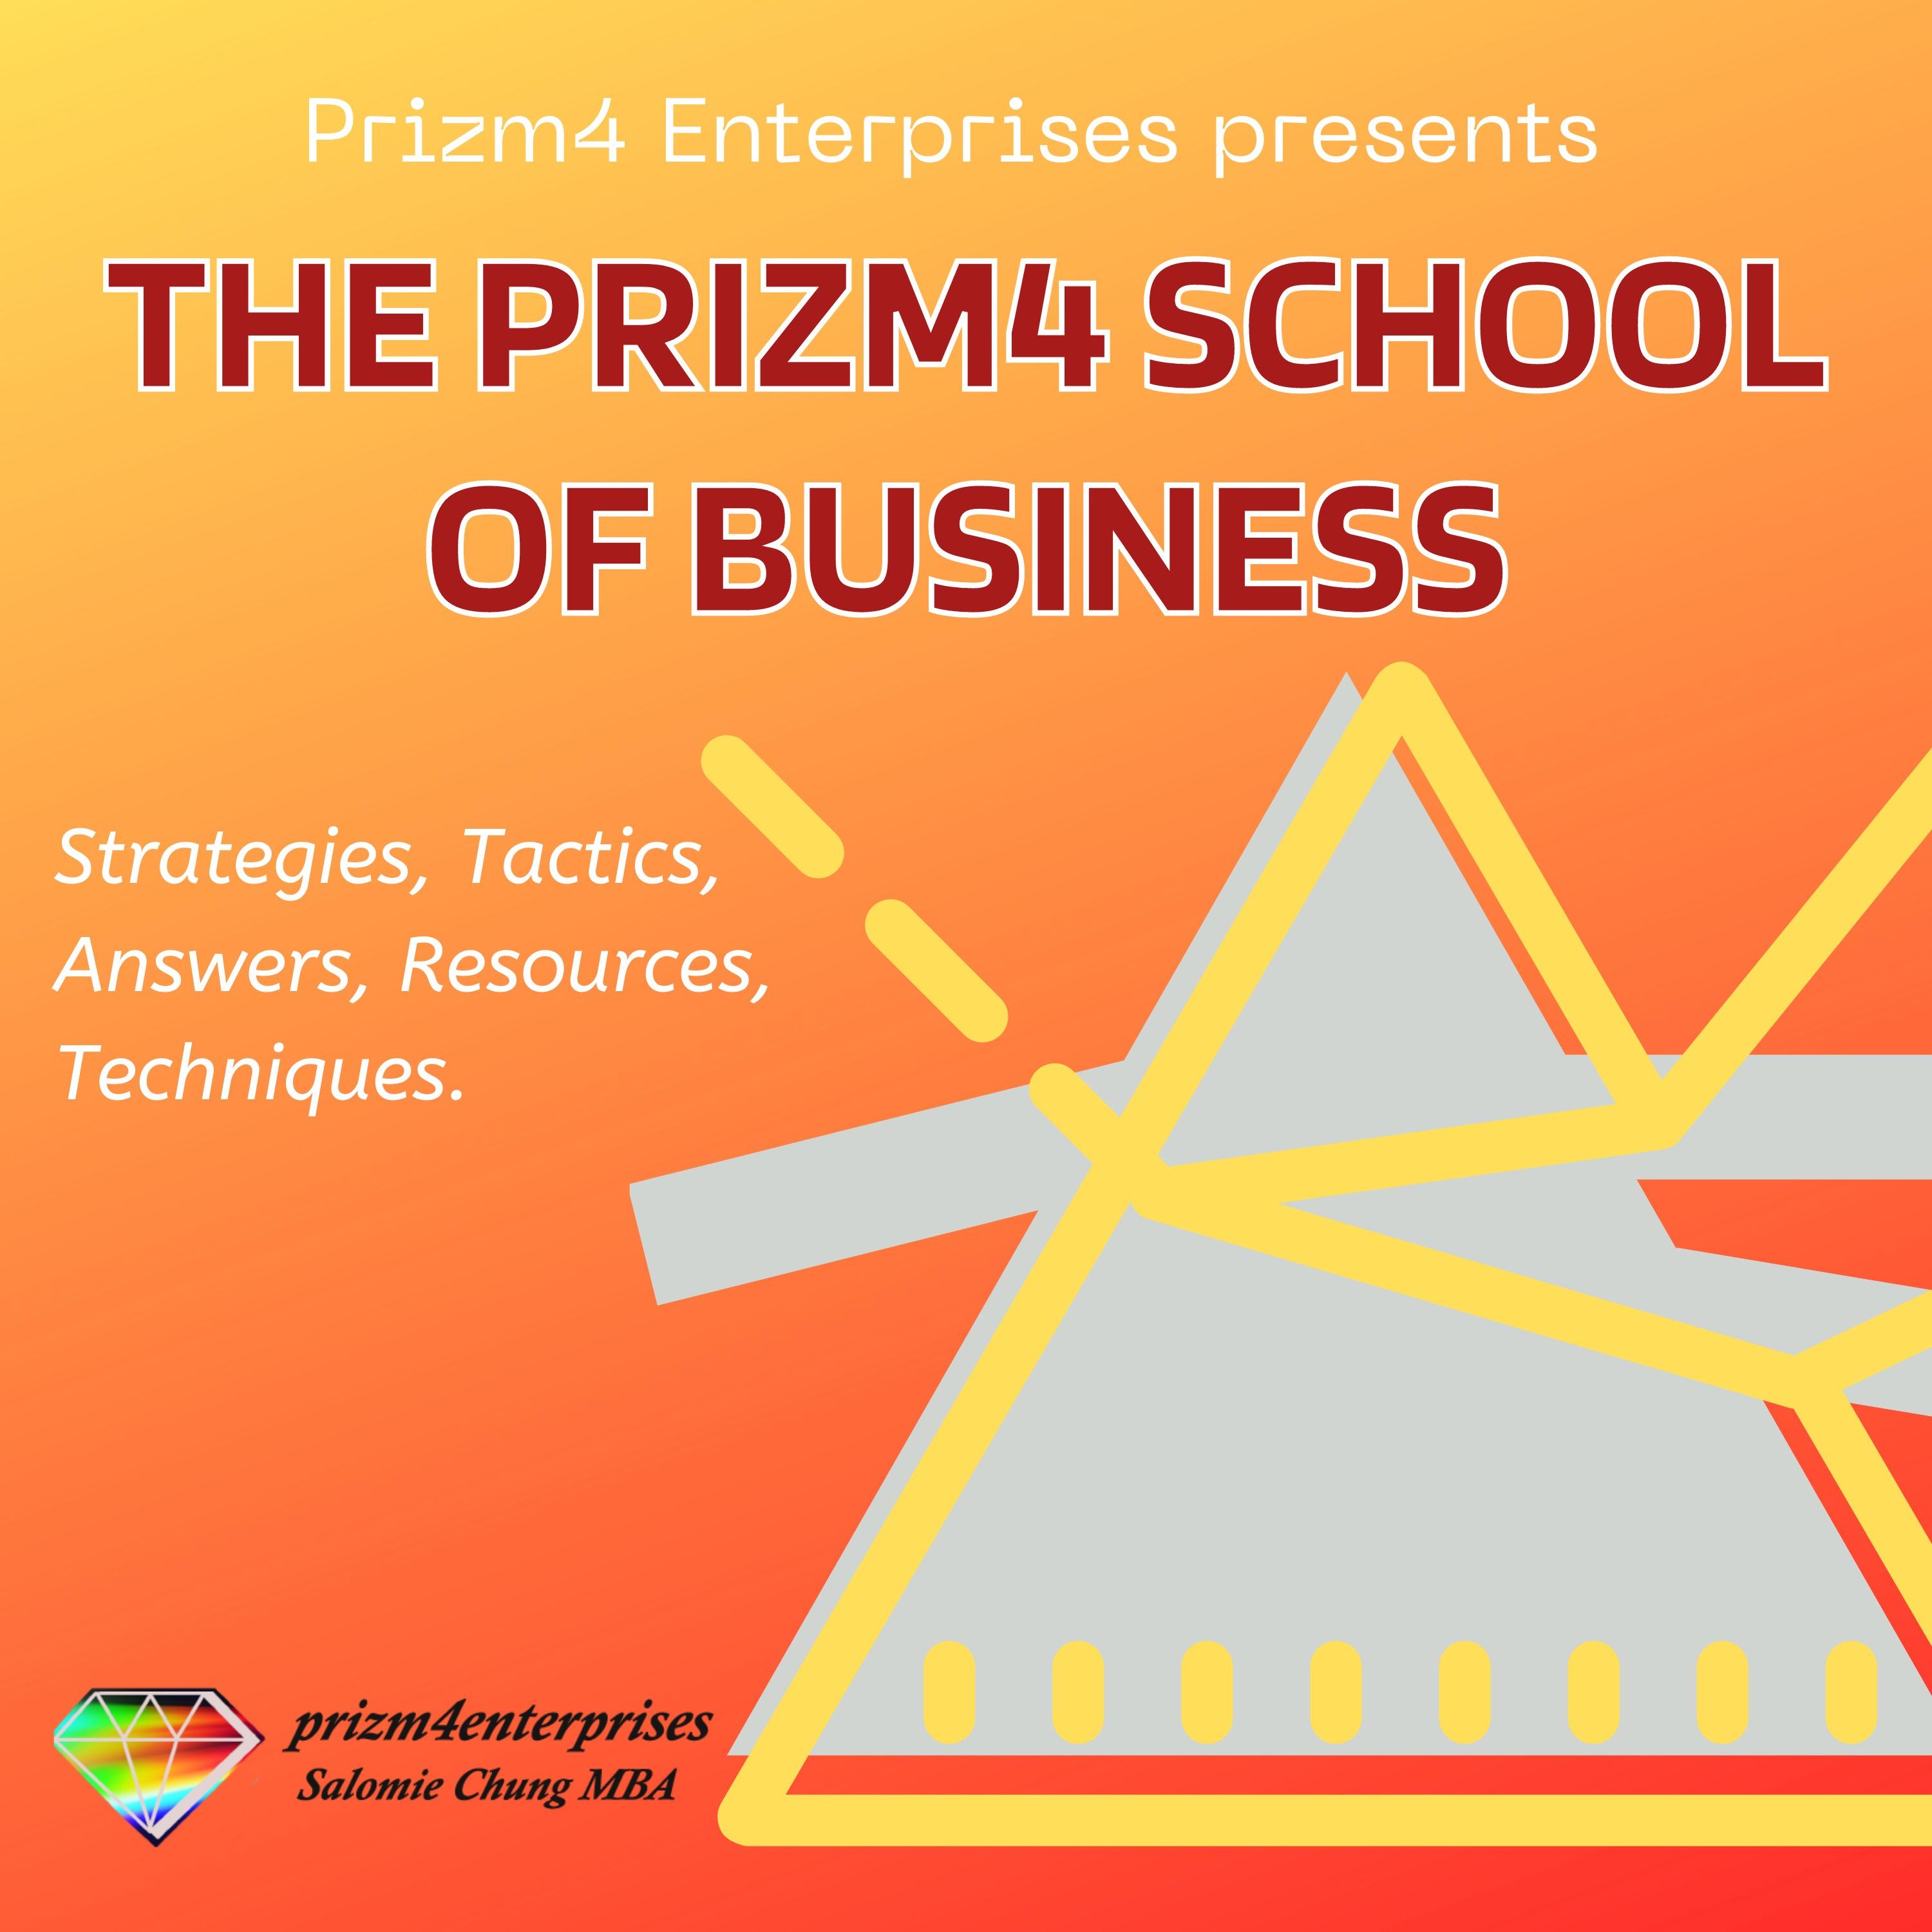 The Prizm4 School of Business